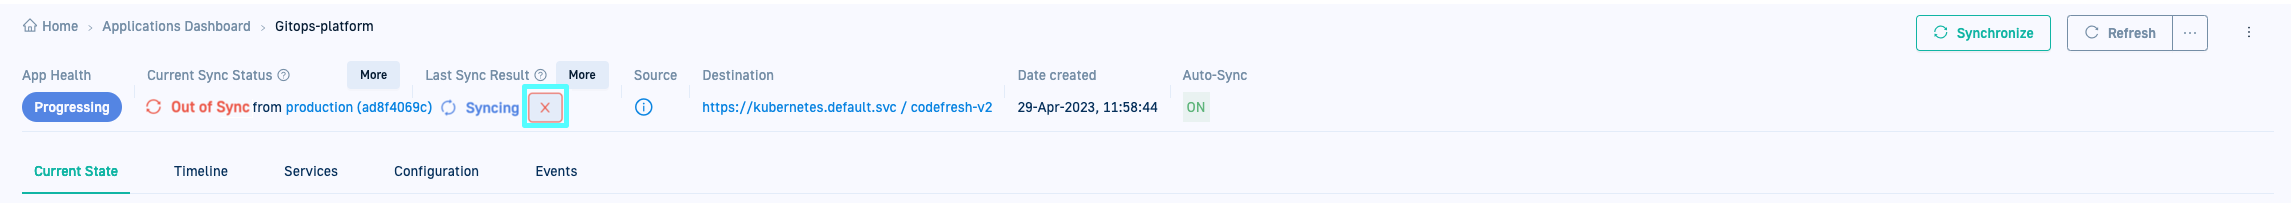 Manually terminate on-going sync